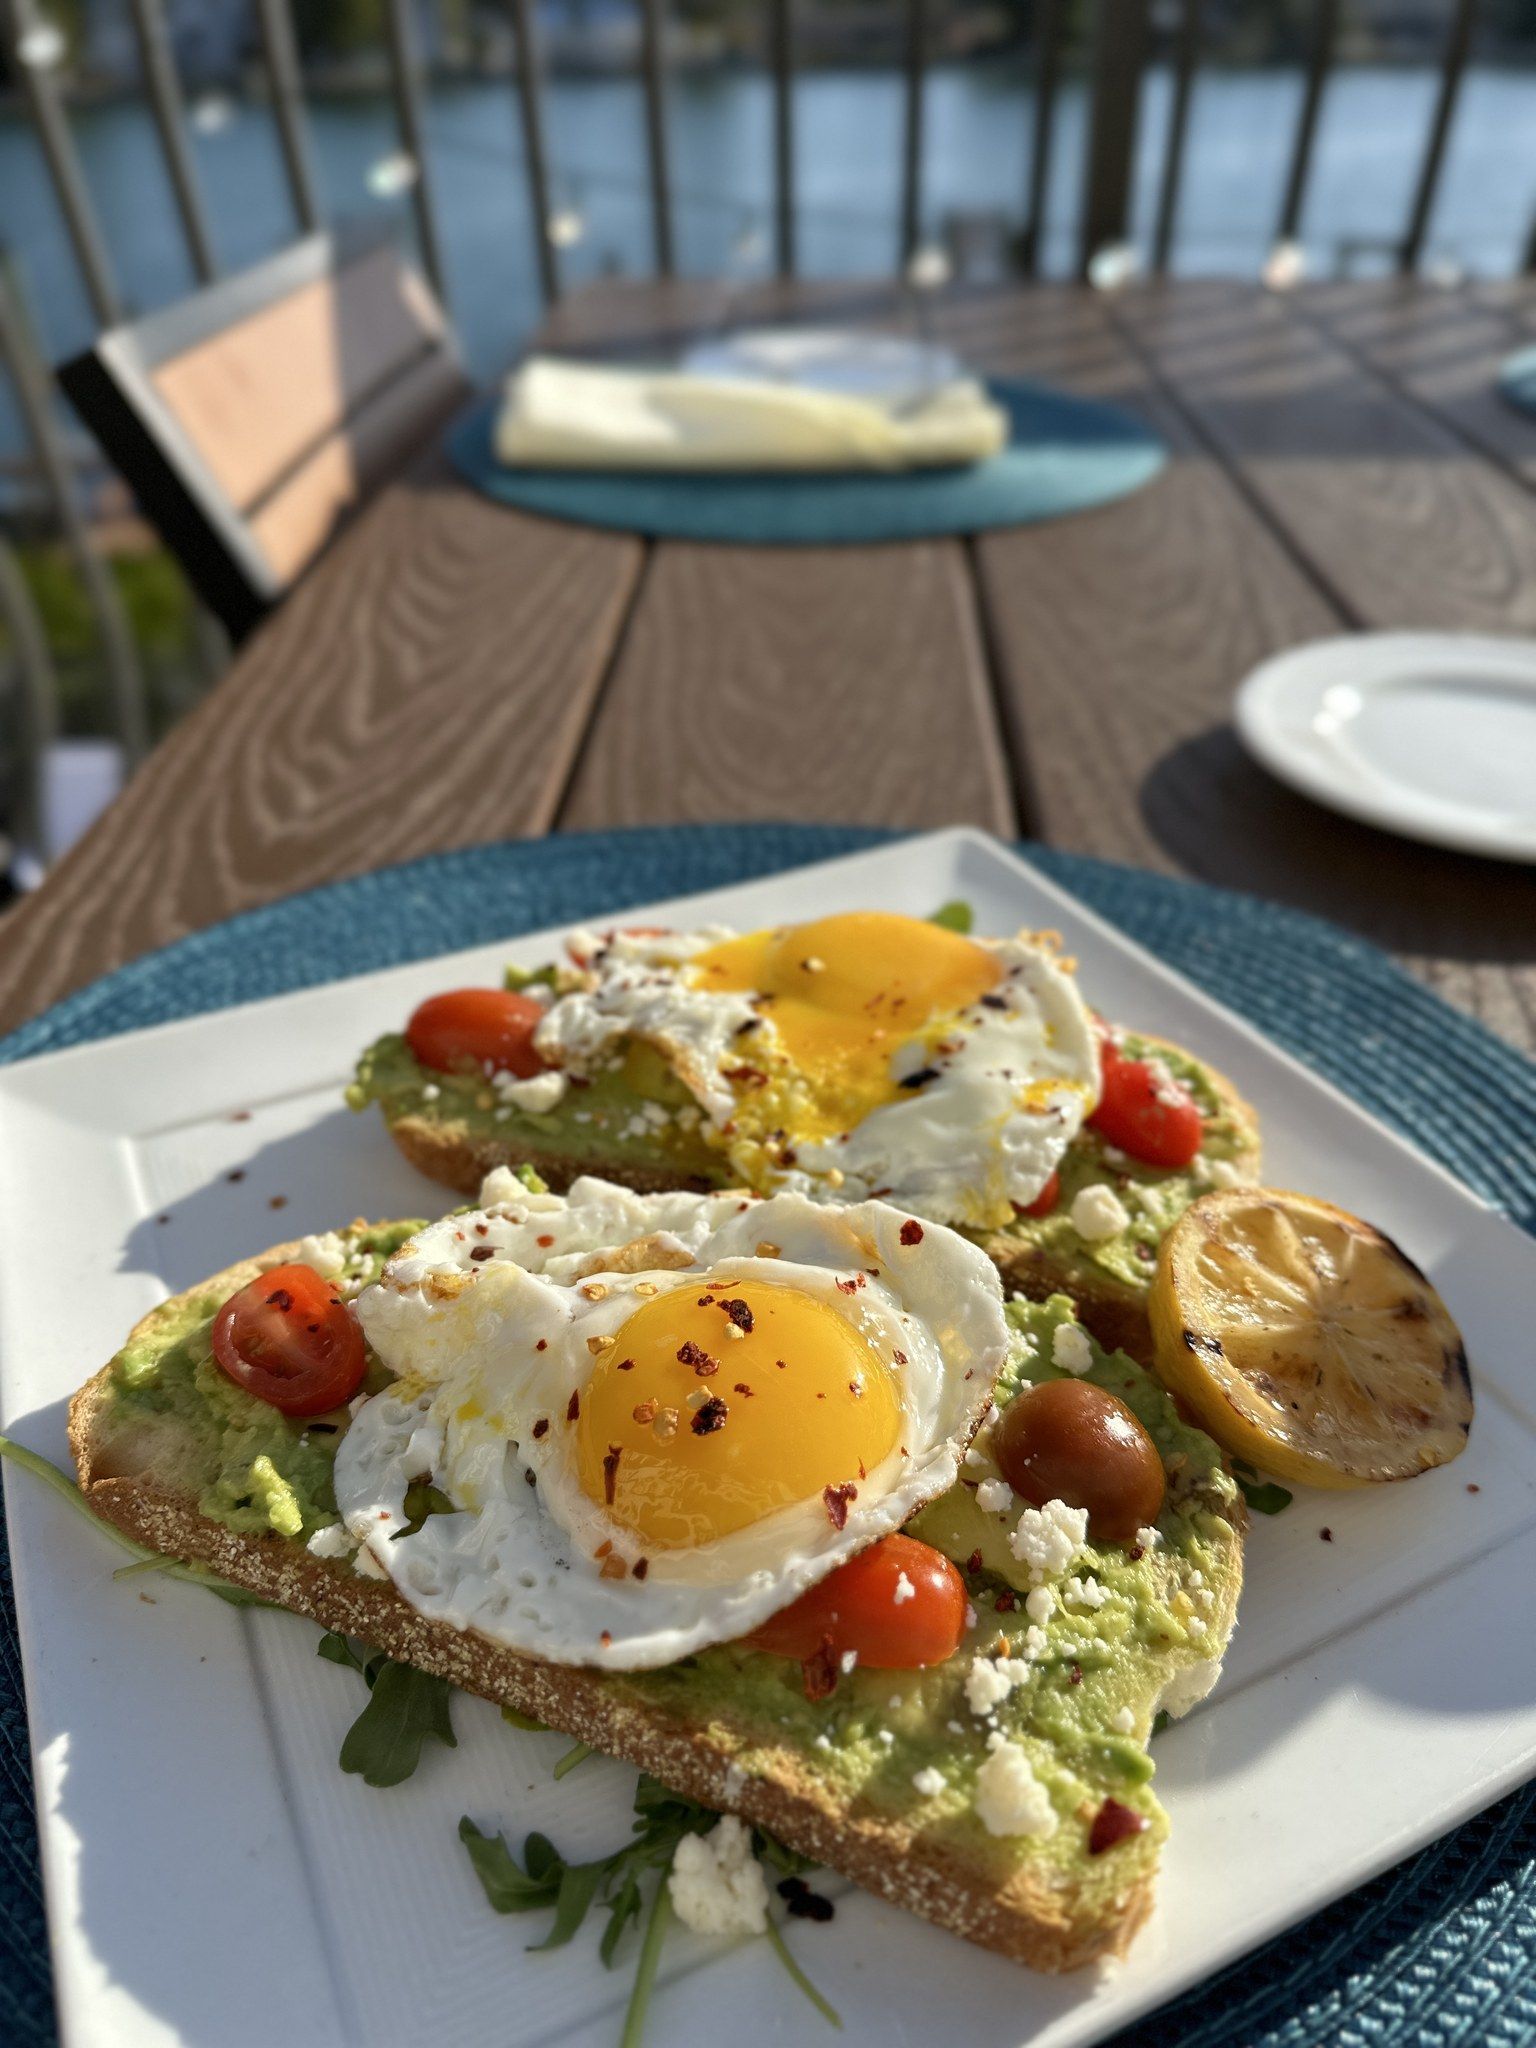 Breakfast plate on outdoor table at Castile Restaurant of avocado toast and eggs